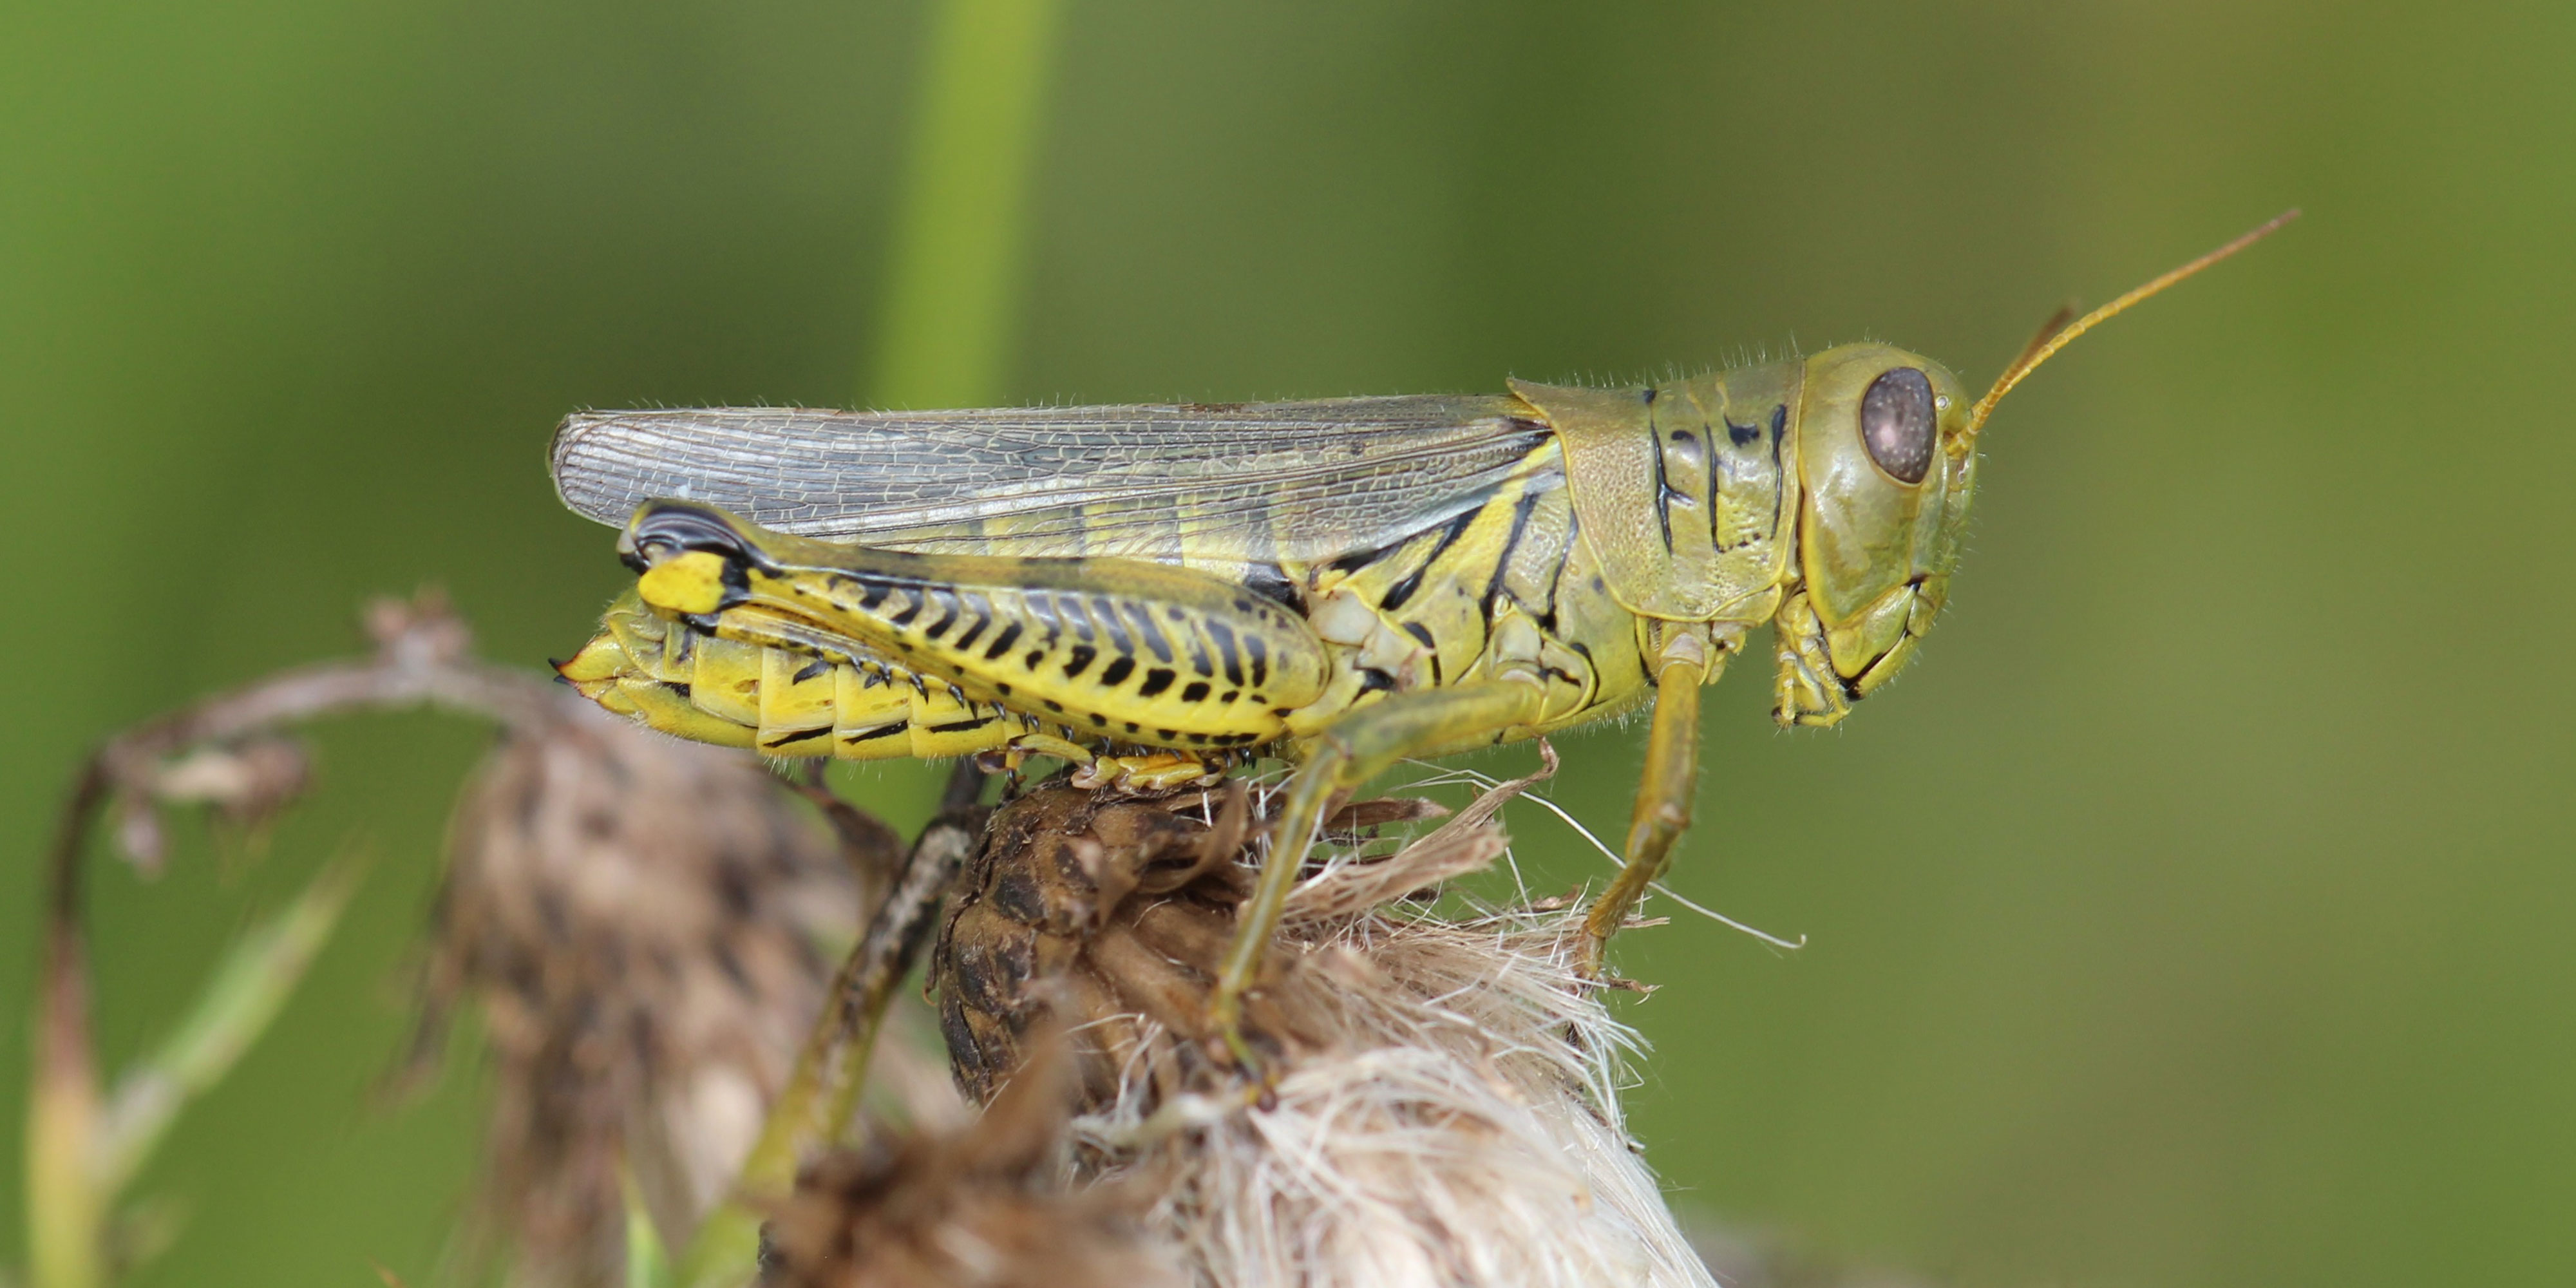 Green and yellow grasshopper with black chevron markings on hindlegs.